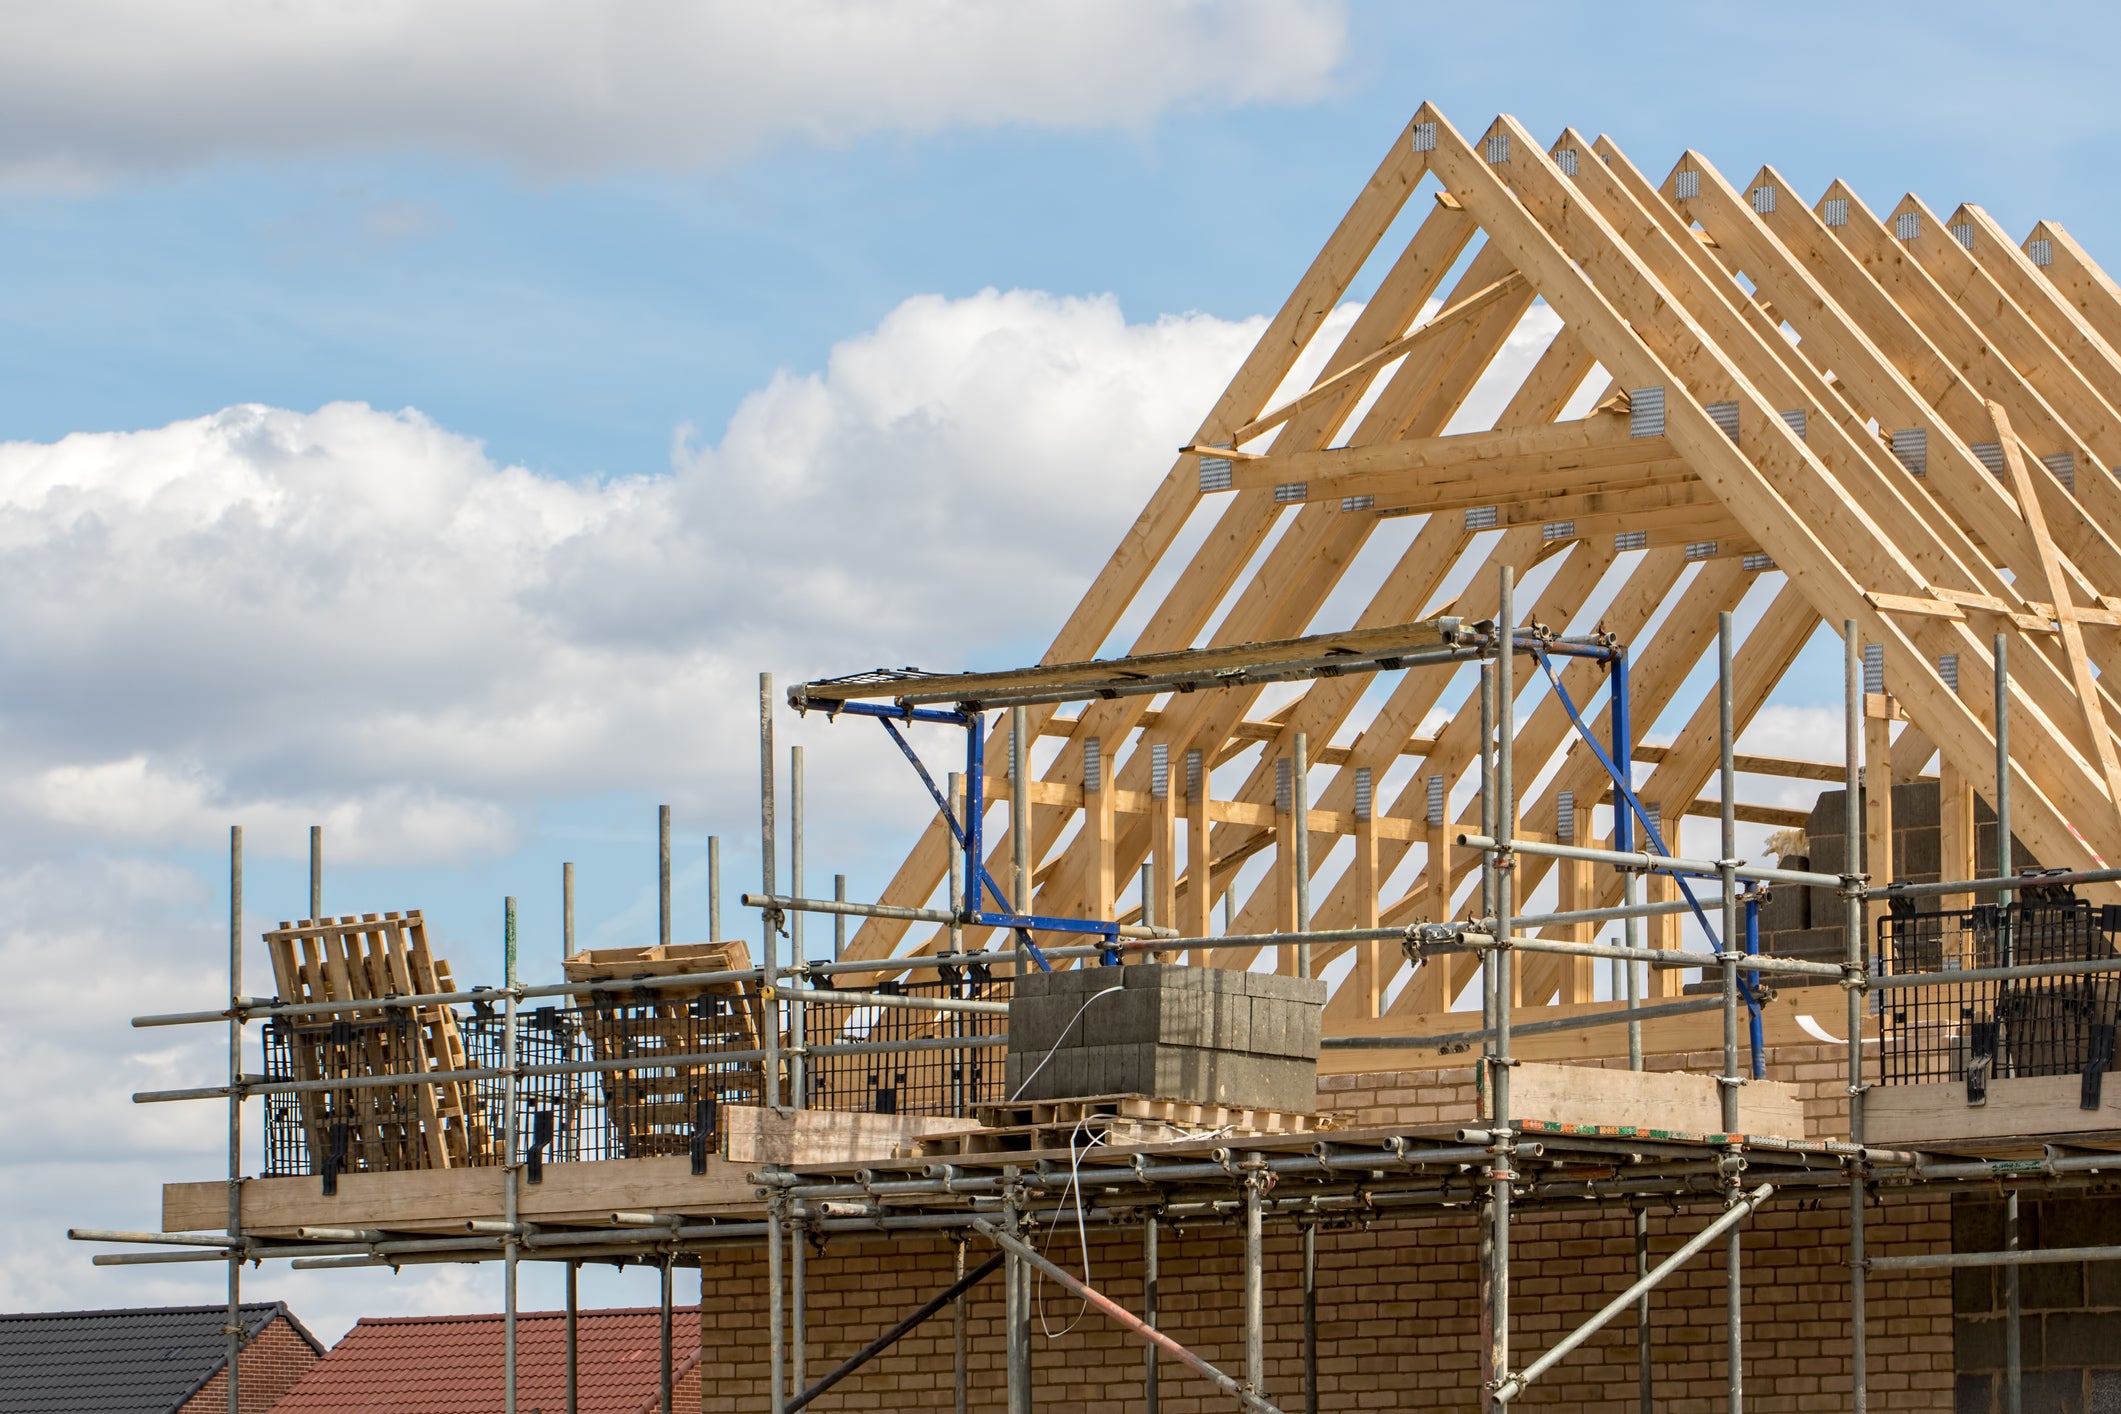 The reforms would see developments in some areas given automatic planning permission